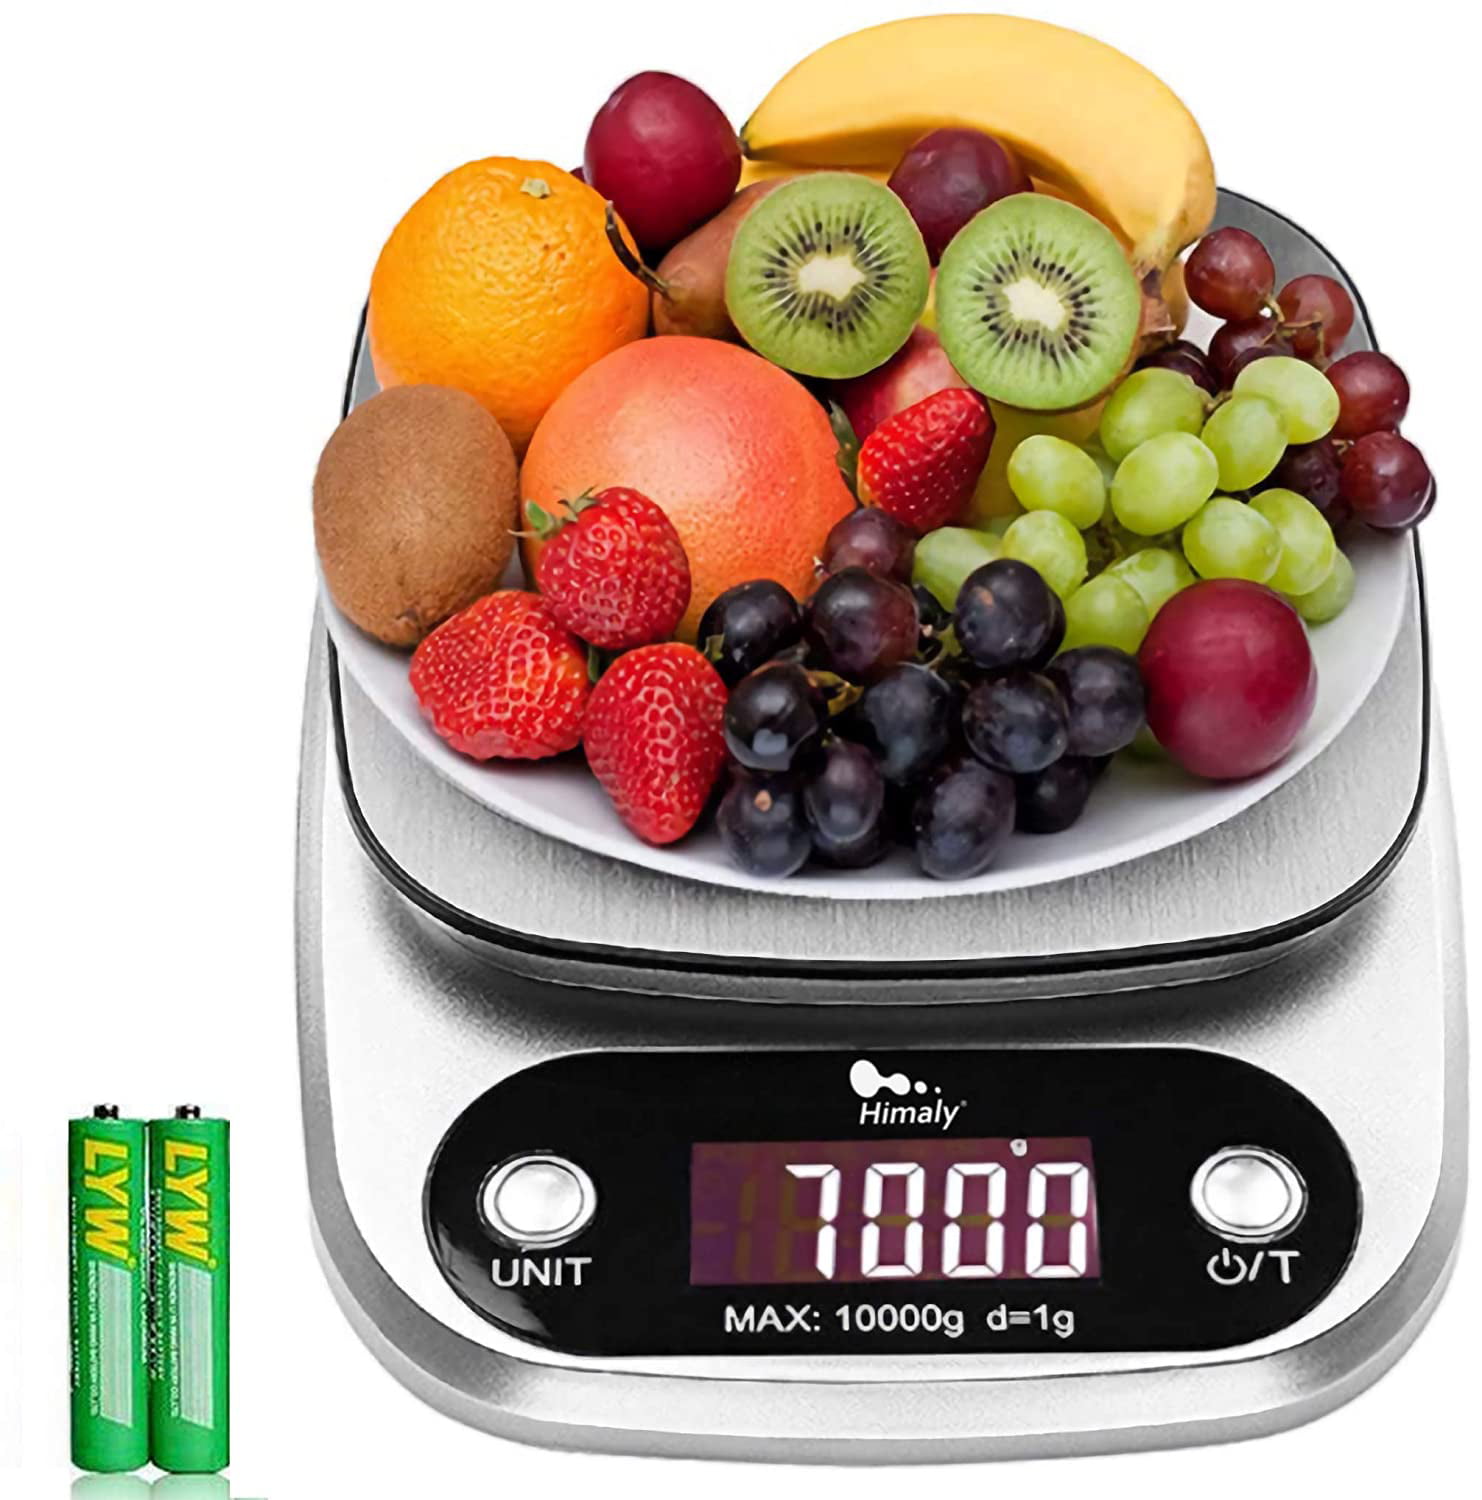 Stainless Steel Digital Kitchen Scale 10000g/1g High Precision Measurement LCD 